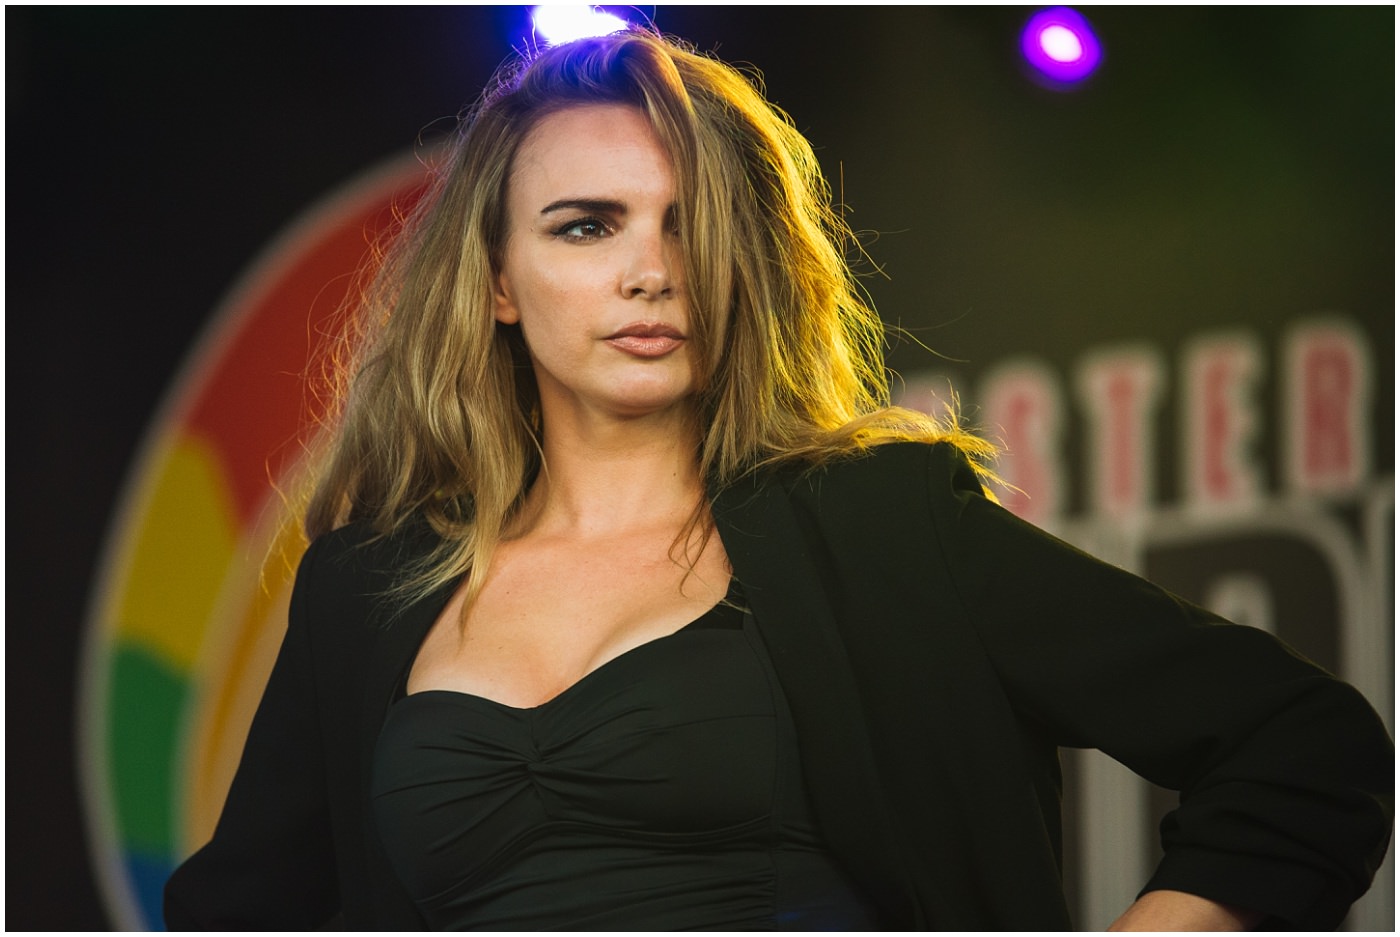 Nadine Coyle of Girls Aloud at Chester Pride